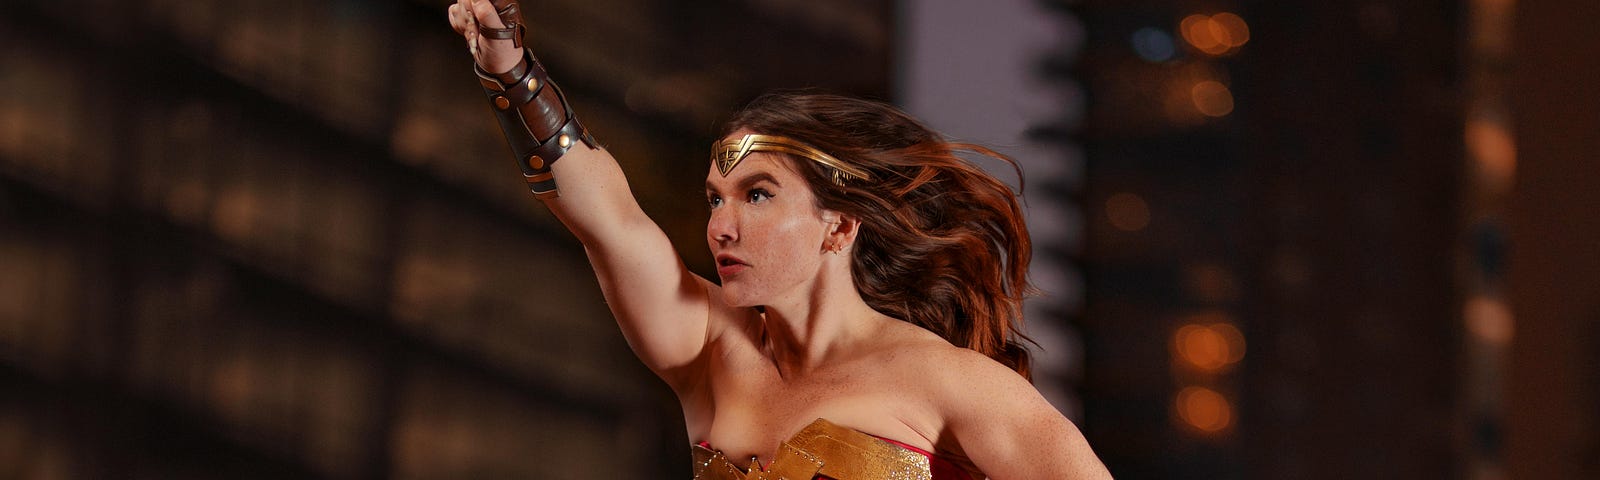 Wonder Woman in action. How to train like Gal Gadot’s Wonder Woman and what to expect from this intense exercise routine